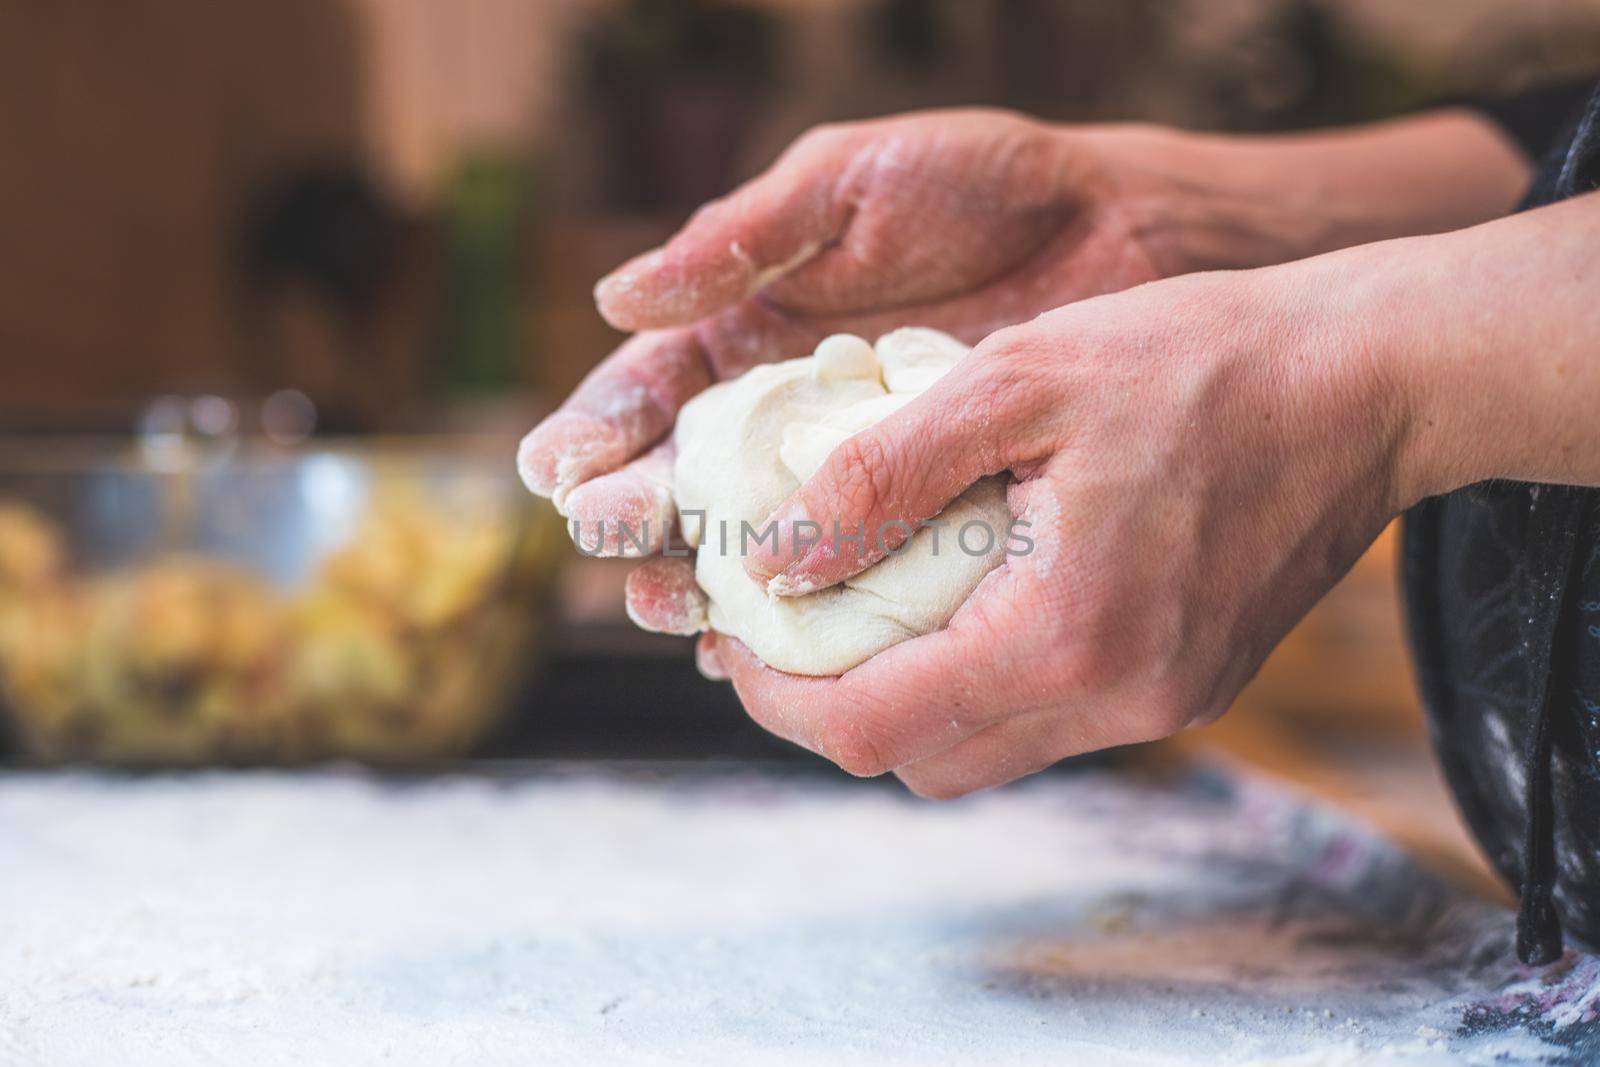 Kneading traditional dough in the kitchen, close up by Daxenbichler